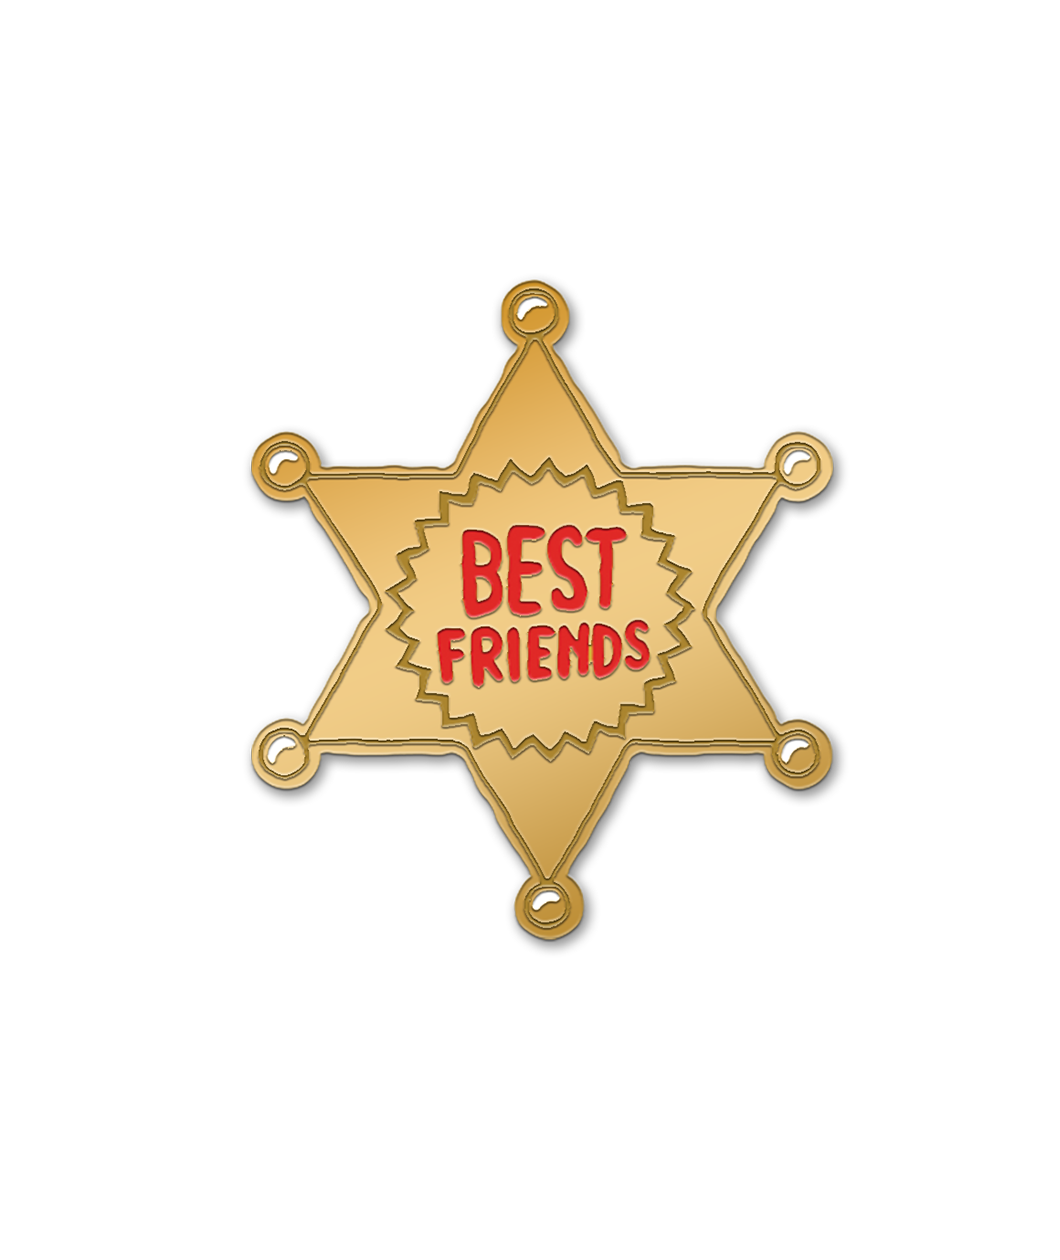 Gold metal plating sheriff 6 sided star pin with the words, "BEST FRIENDS" in red in the center. 